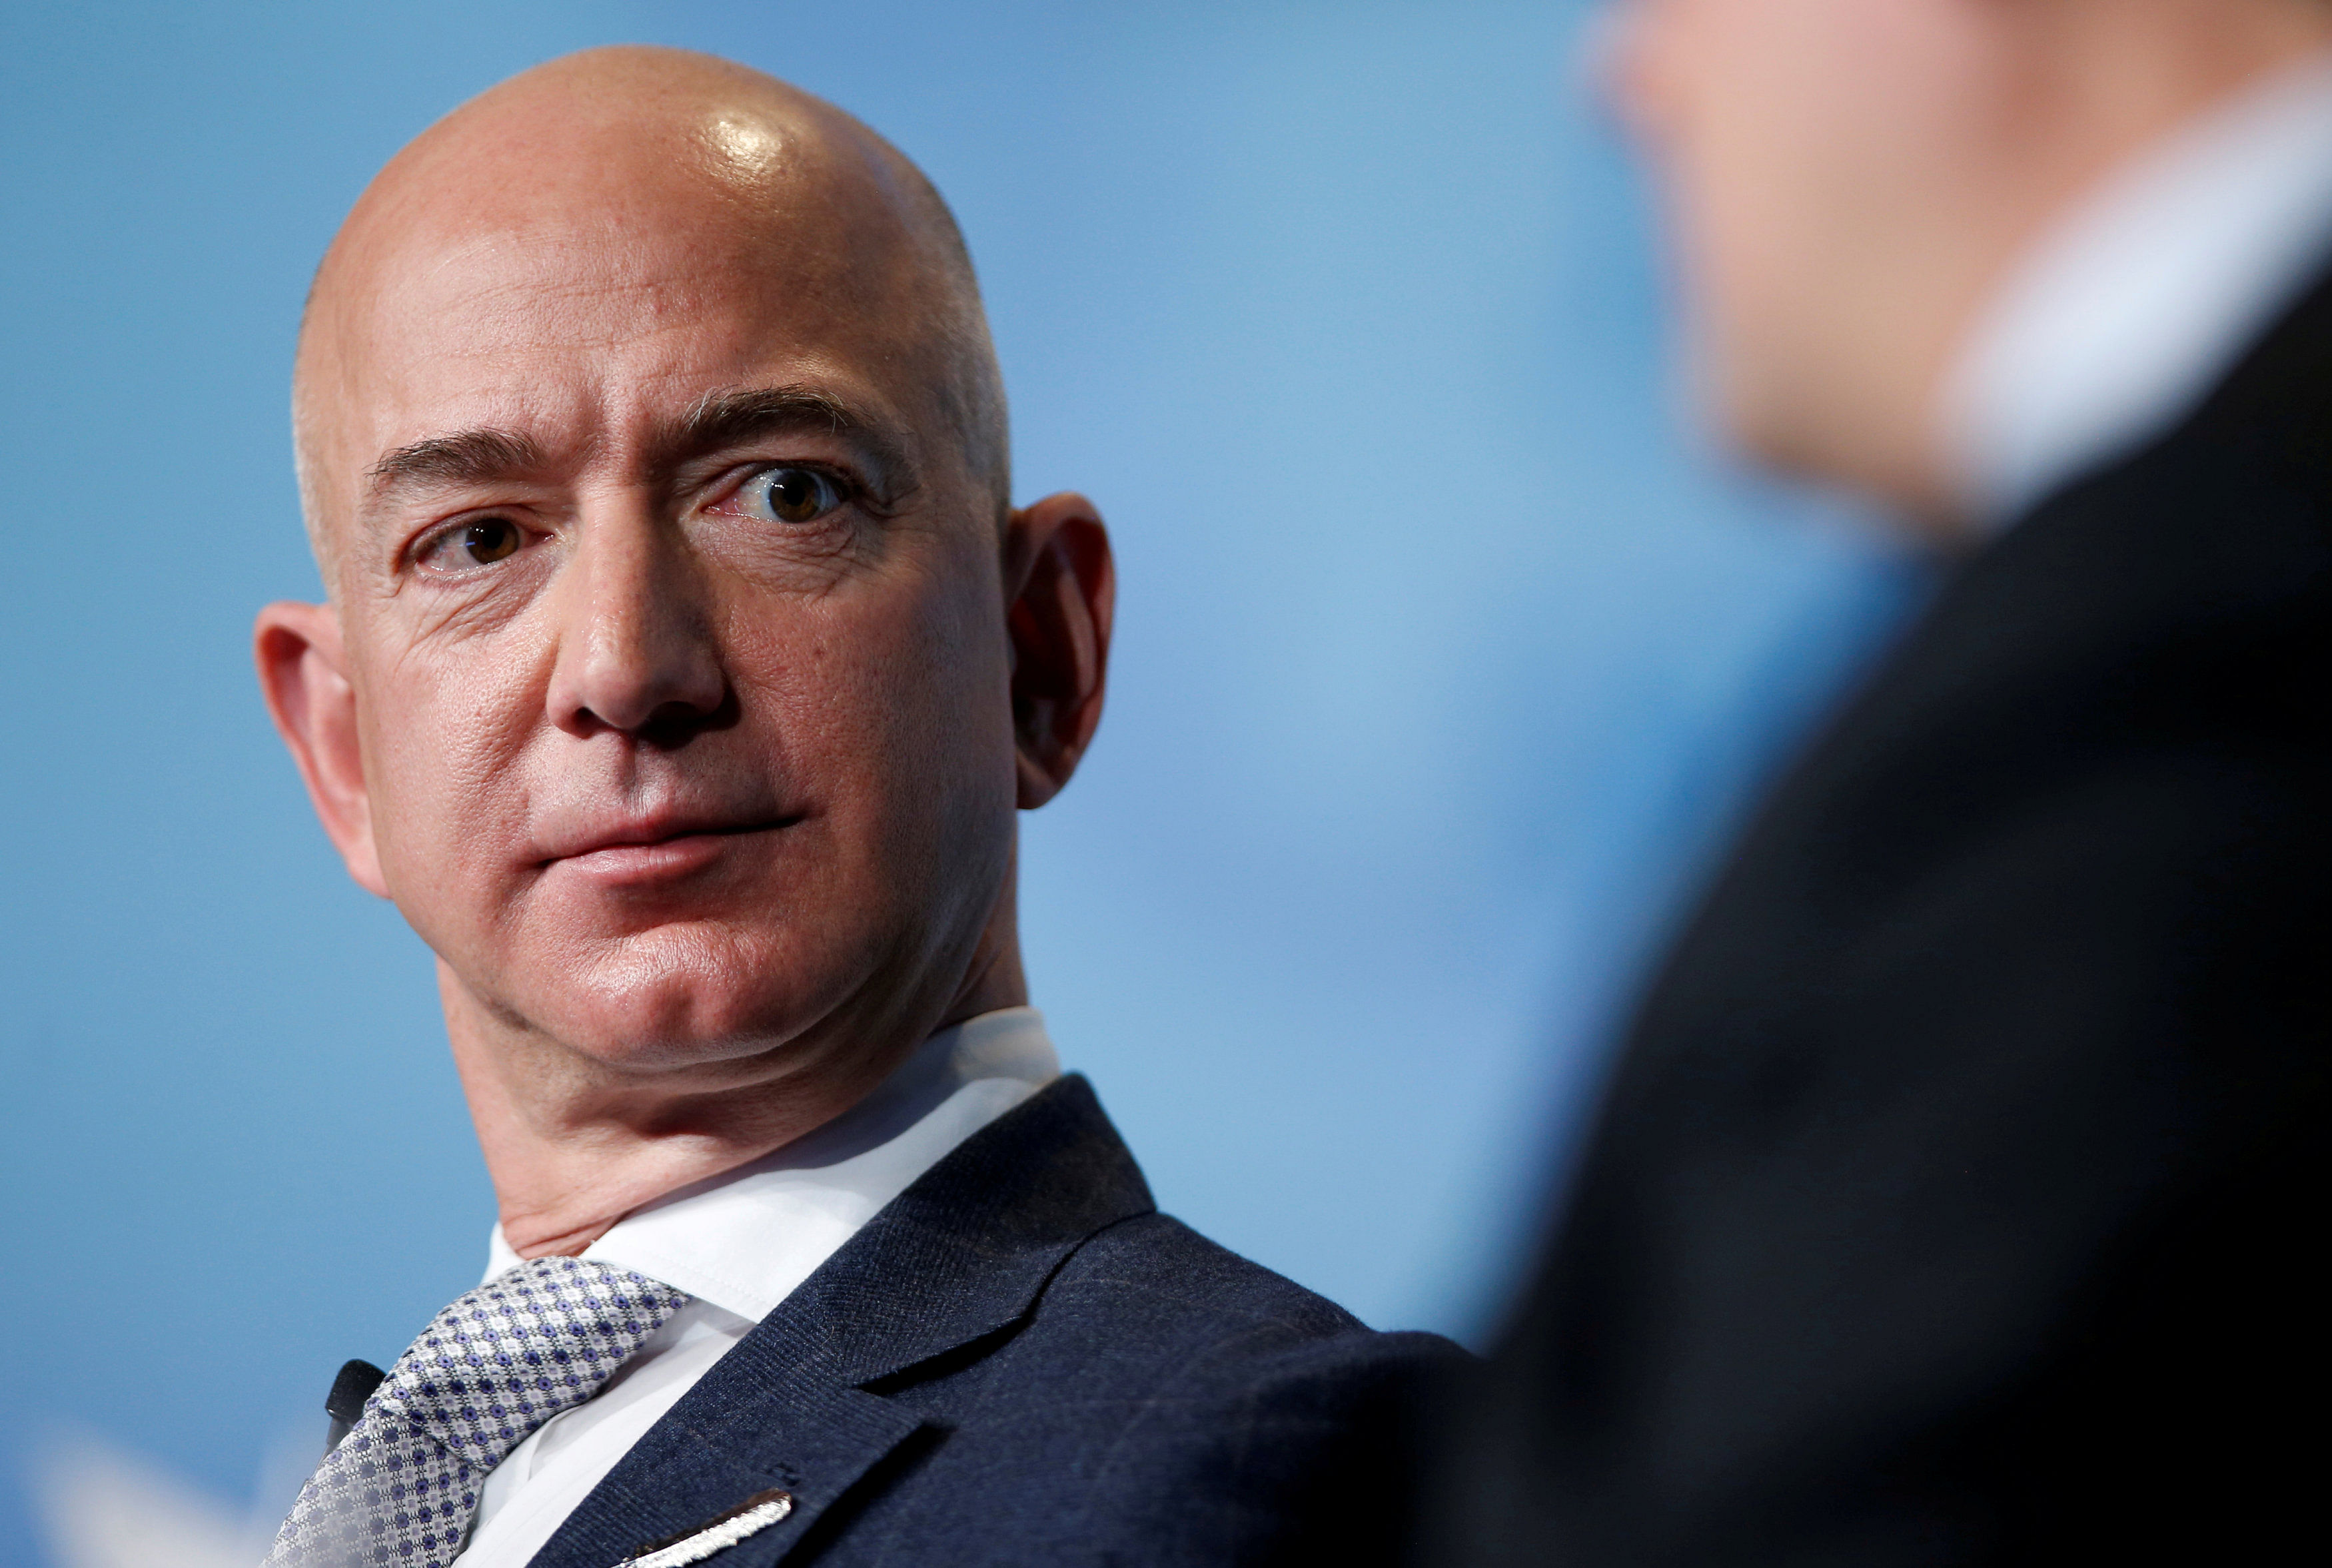 Asked what he would have done if things hadn't worked out, Bezos said: "I would be an extremely happy software programmer somewhere". (Reuters Photo)